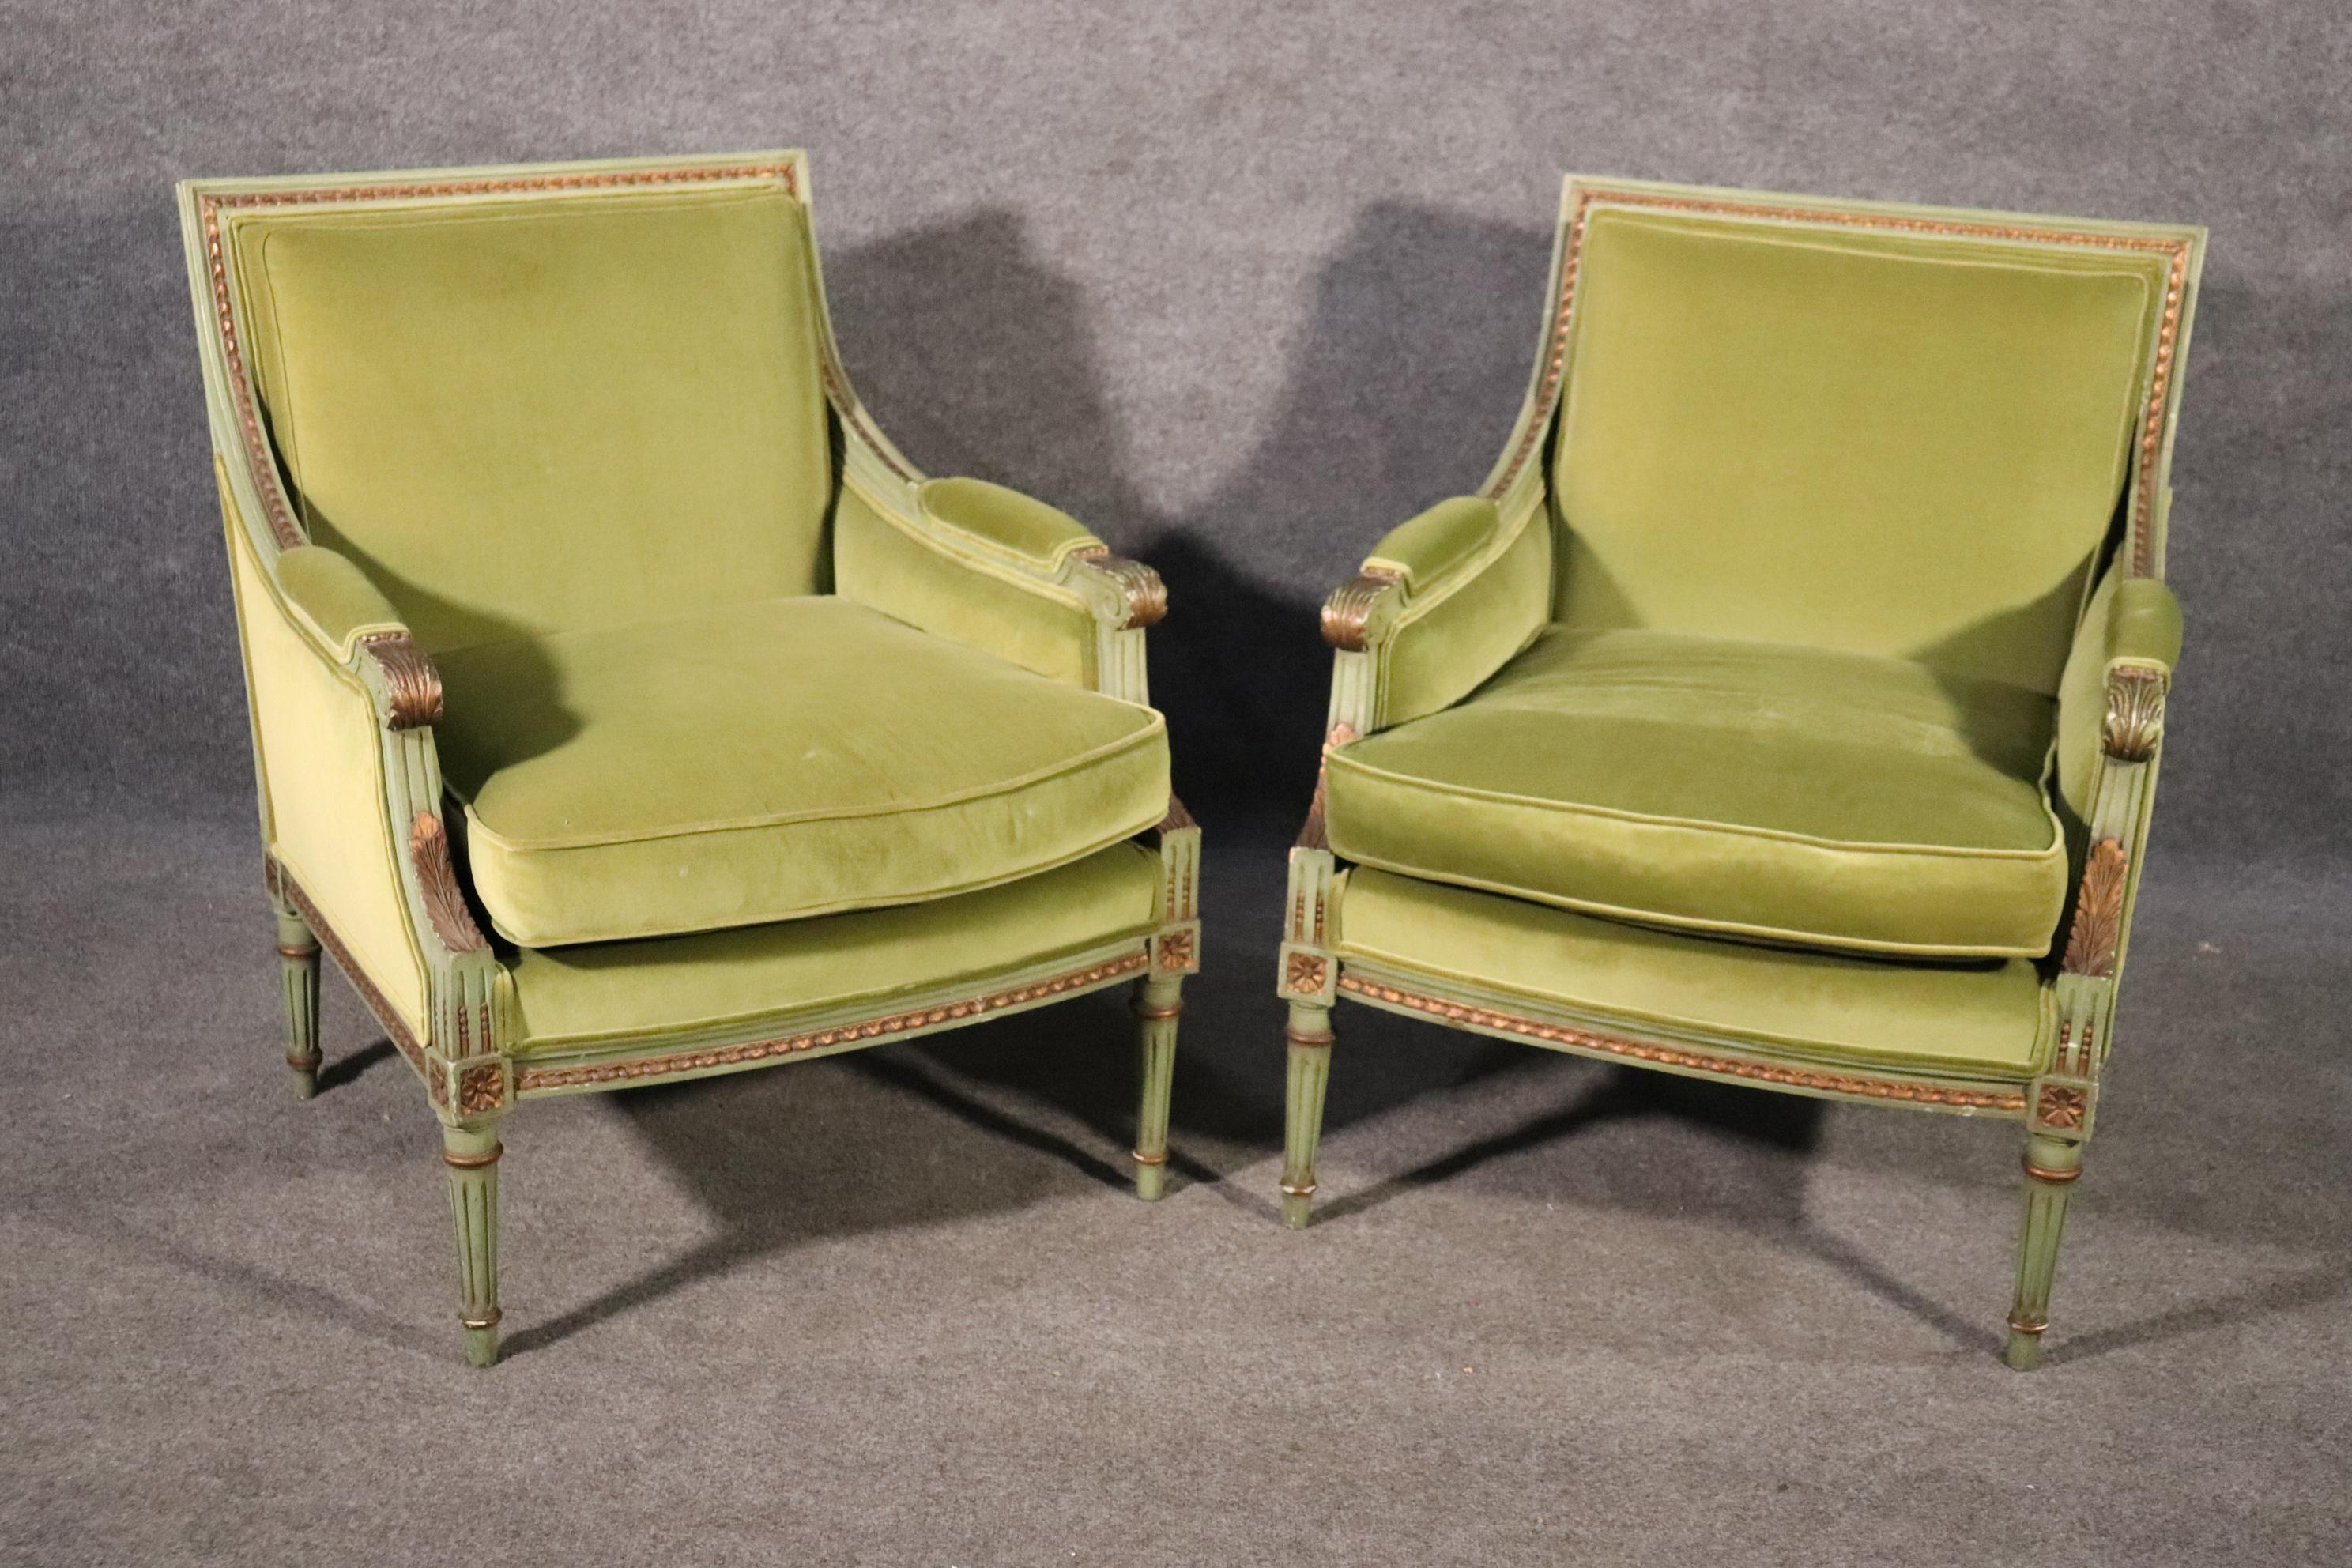 This is a gorgeous pair of classic 1950s era French Louis XVI style bergere chairs. The chairs are upholstered in a green velvet and are in good condition. The cushions have foam cores which may need to be replaced due to age. The frames are in good